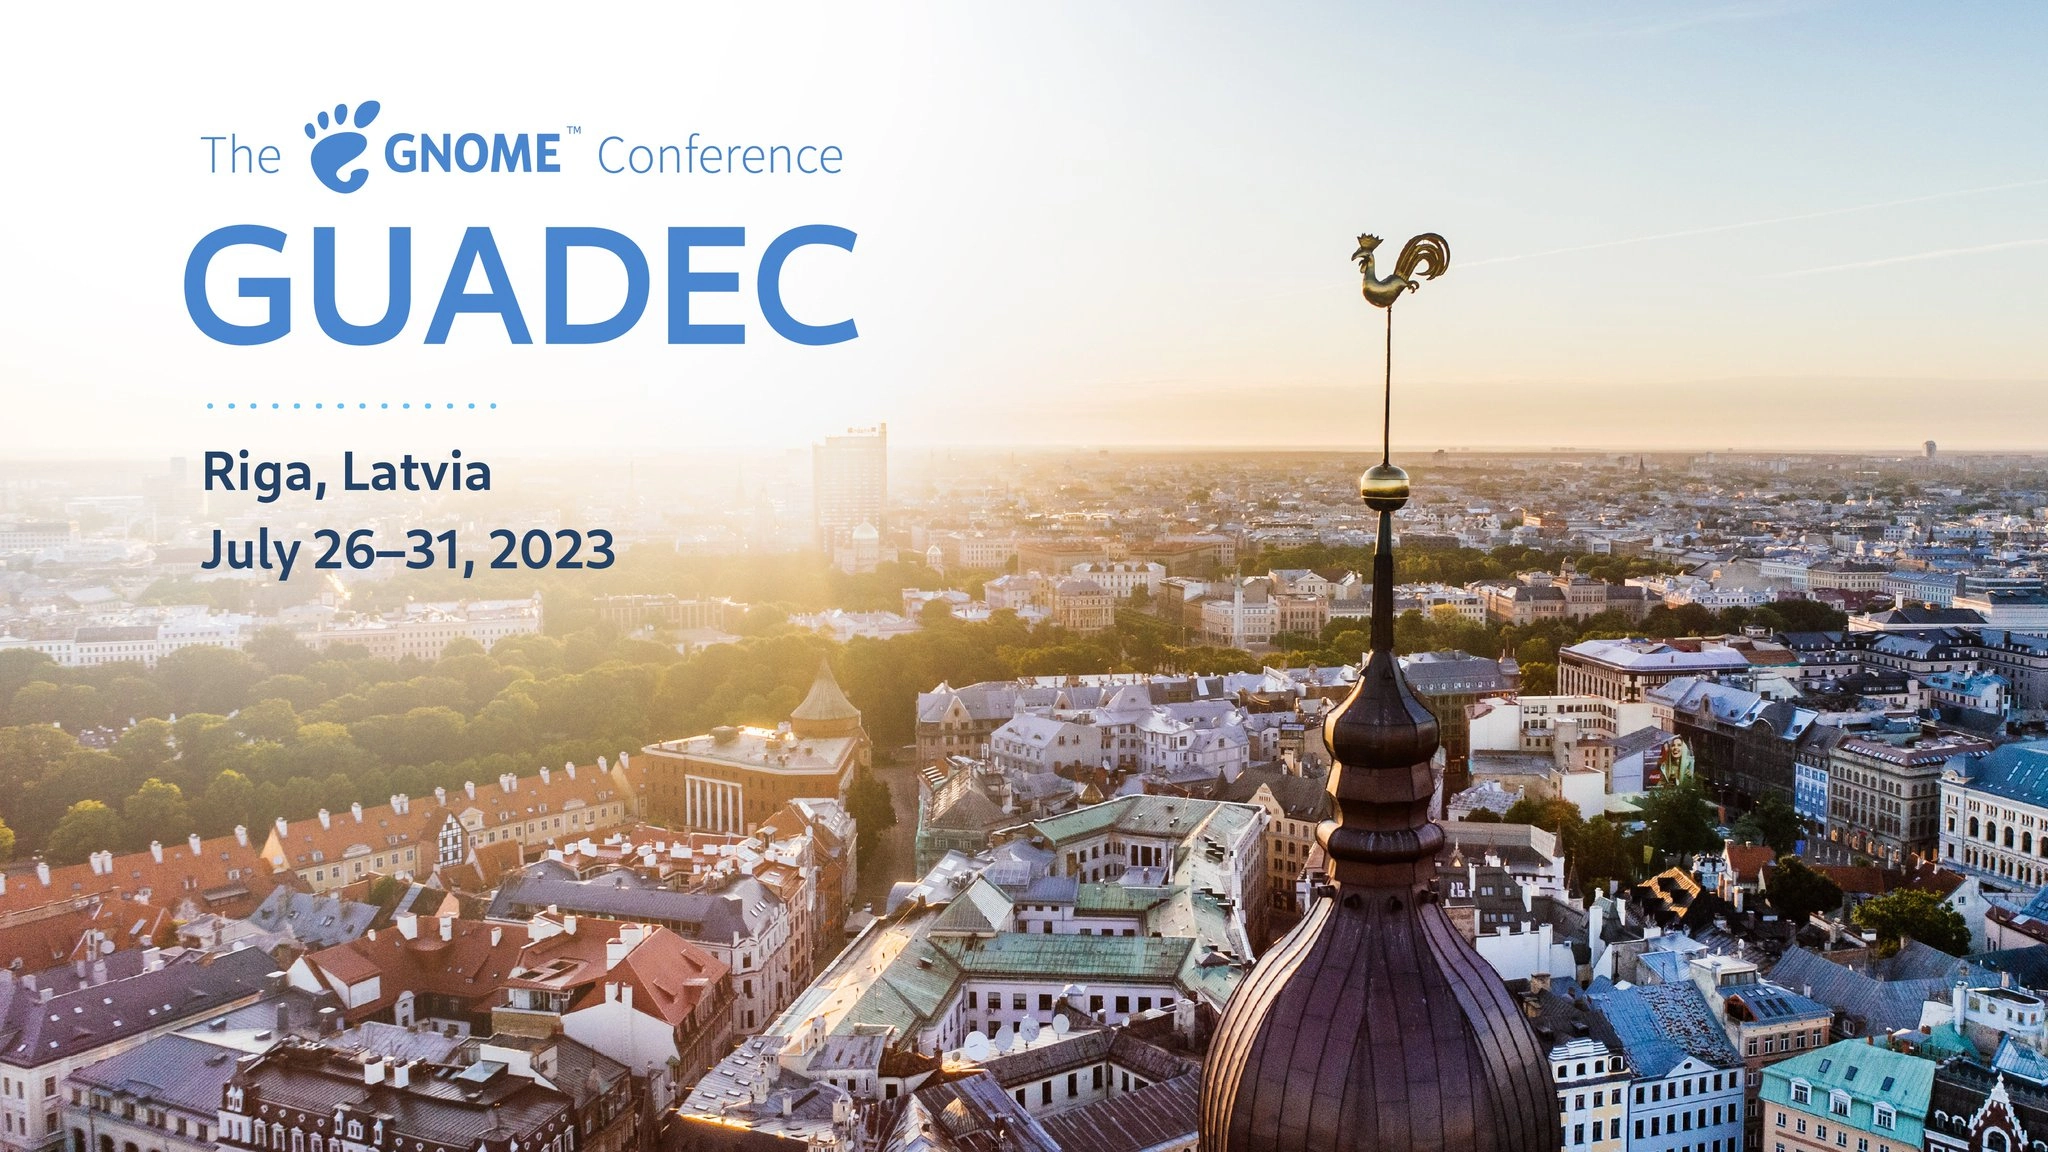 GUADEC 2023 Conference Takes Place July 26-31 in Riga, Latvia, for GNOME 45